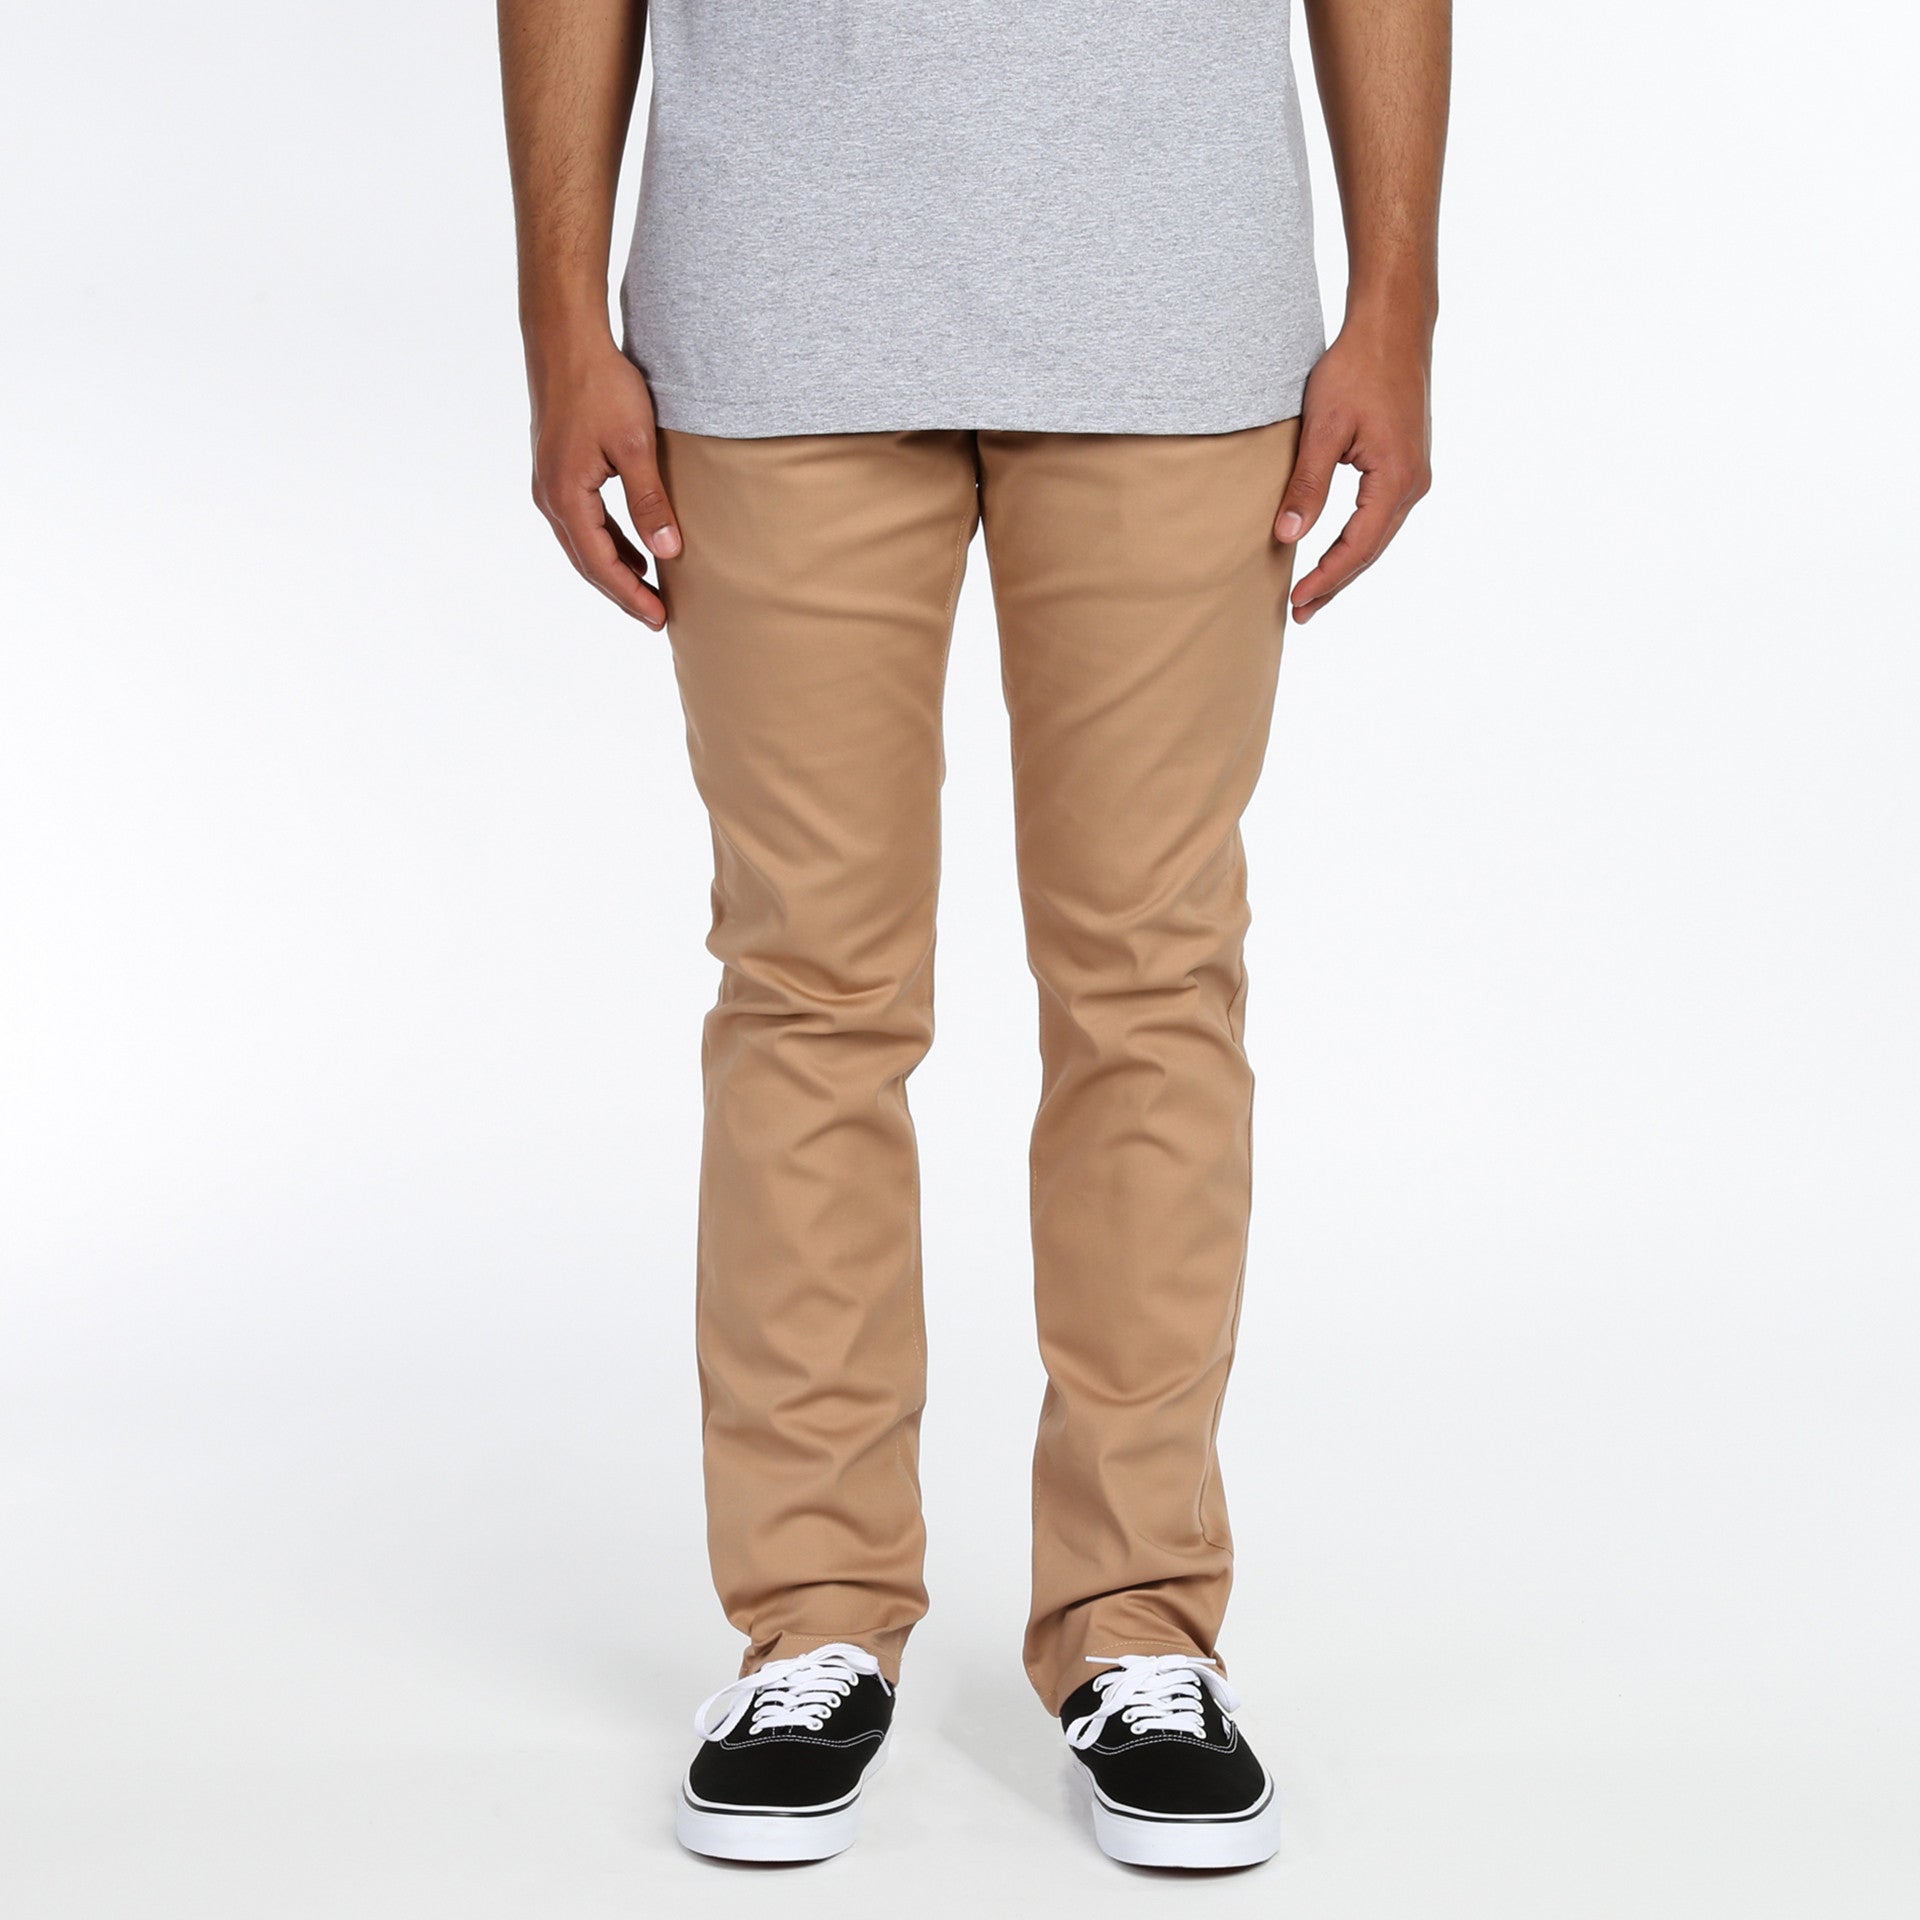 Rustic chinos - Trousers - CLOTHING - Man 